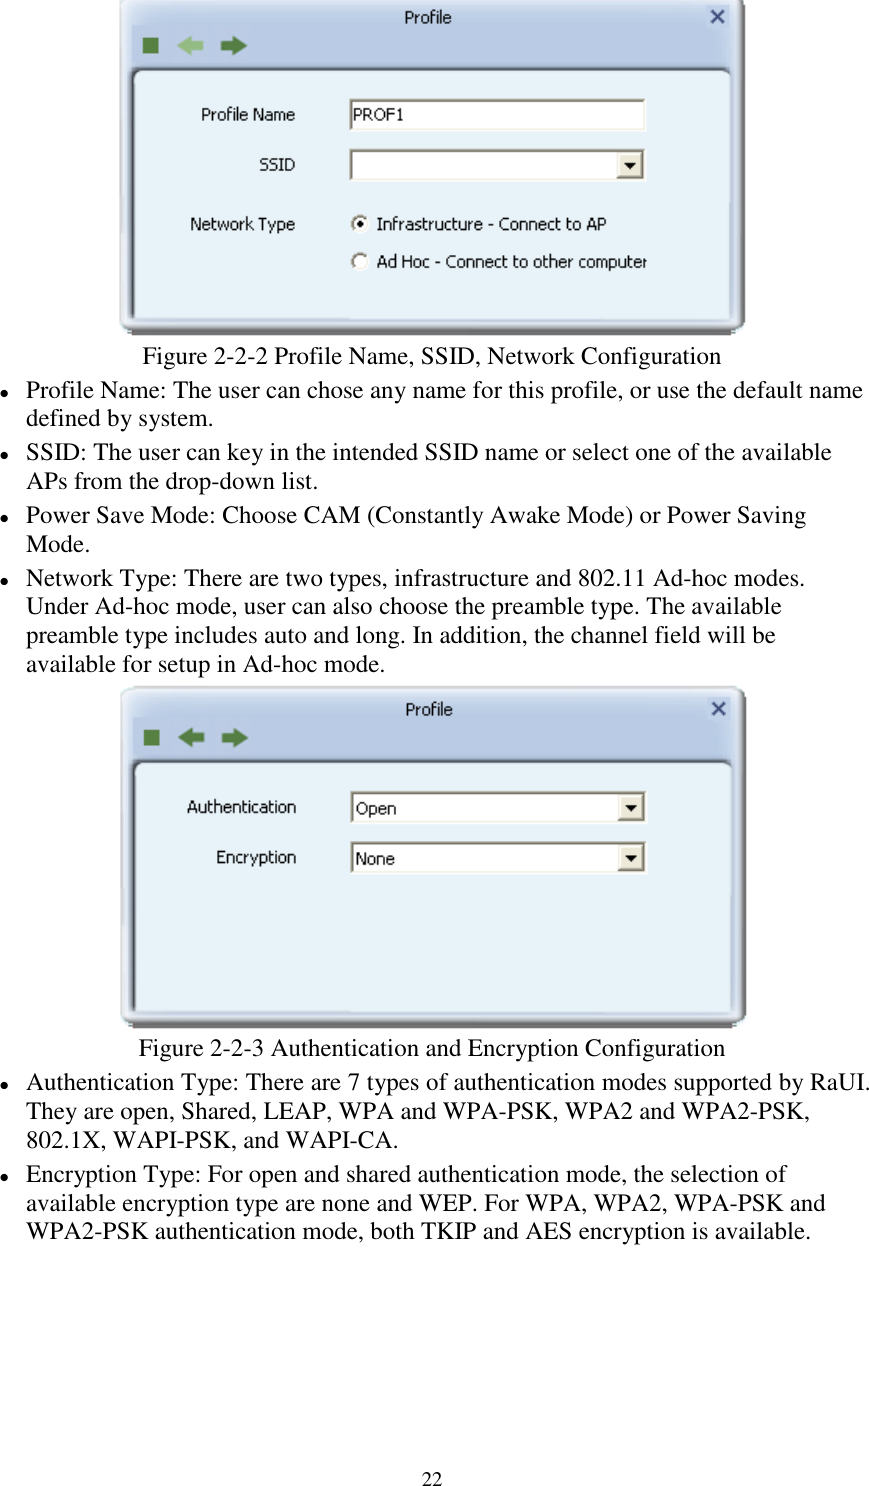 22Figure 2-2-2 Profile Name, SSID, Network ConfigurationProfile Name: The user can chose any name for this profile, or use the default namedefined by system.SSID: The user can key in the intended SSID name or select one of the availableAPs from the drop-down list.Power Save Mode: Choose CAM (Constantly Awake Mode) or Power SavingMode.Network Type: There are two types, infrastructure and 802.11 Ad-hoc modes.Under Ad-hoc mode, user can also choose the preamble type. The availablepreamble type includes auto and long. In addition, the channel field will beavailable for setup in Ad-hoc mode.Figure 2-2-3 Authentication and Encryption ConfigurationAuthentication Type: There are 7 types of authentication modes supported by RaUI.They are open, Shared, LEAP, WPA and WPA-PSK, WPA2 and WPA2-PSK,802.1X, WAPI-PSK, and WAPI-CA.Encryption Type: For open and shared authentication mode, the selection ofavailable encryption type are none and WEP. For WPA, WPA2, WPA-PSK andWPA2-PSK authentication mode, both TKIP and AES encryption is available.